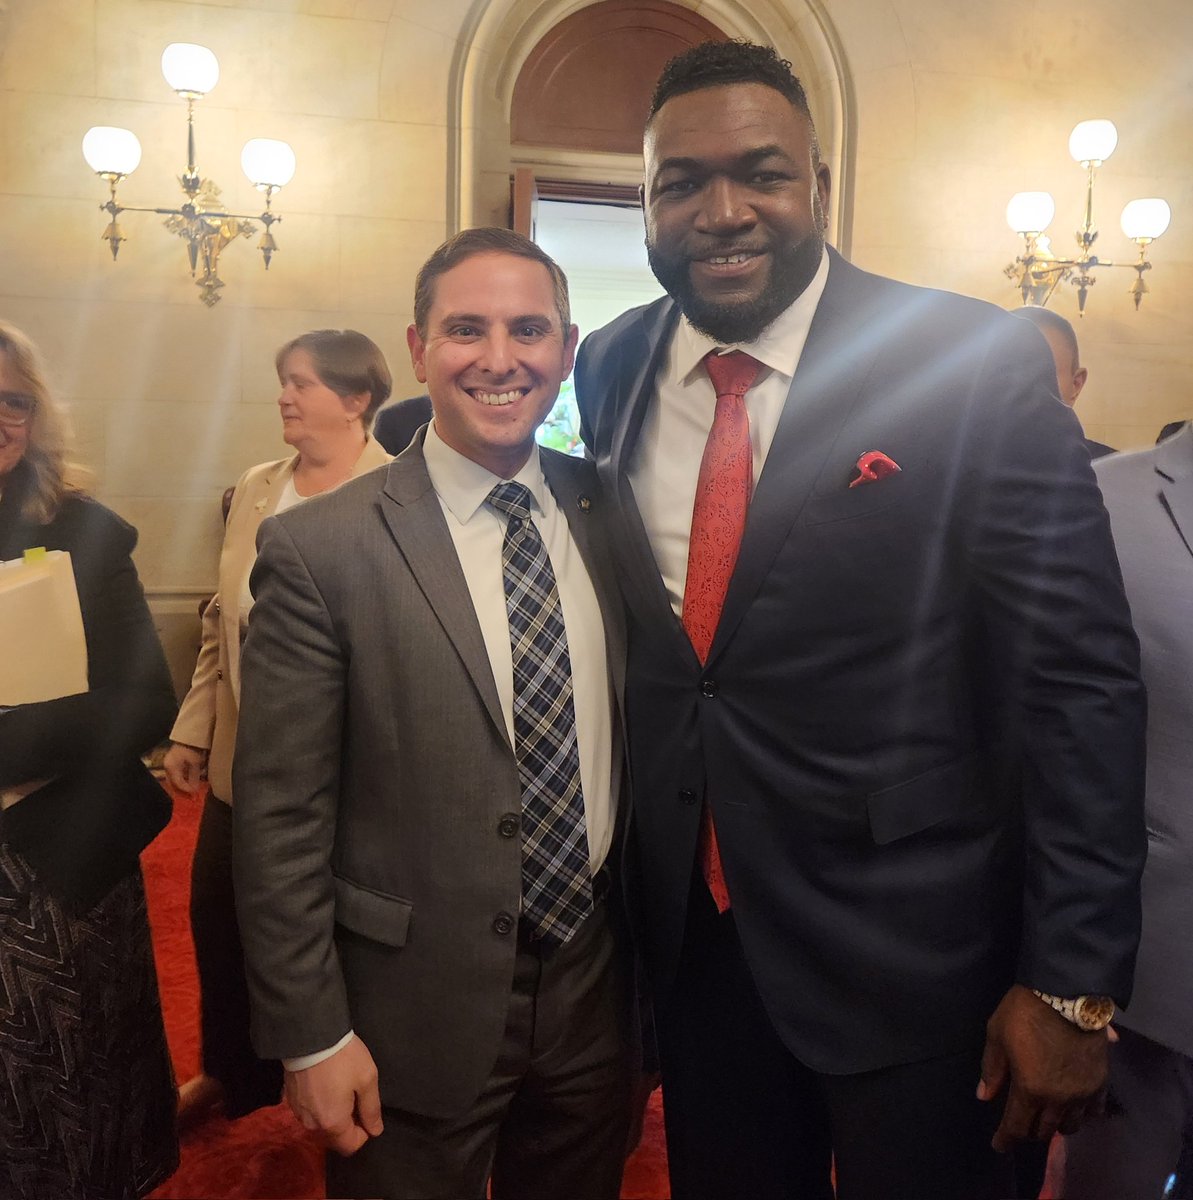 When Big Papi comes to Albany everyone becomes a Red Sox fan!